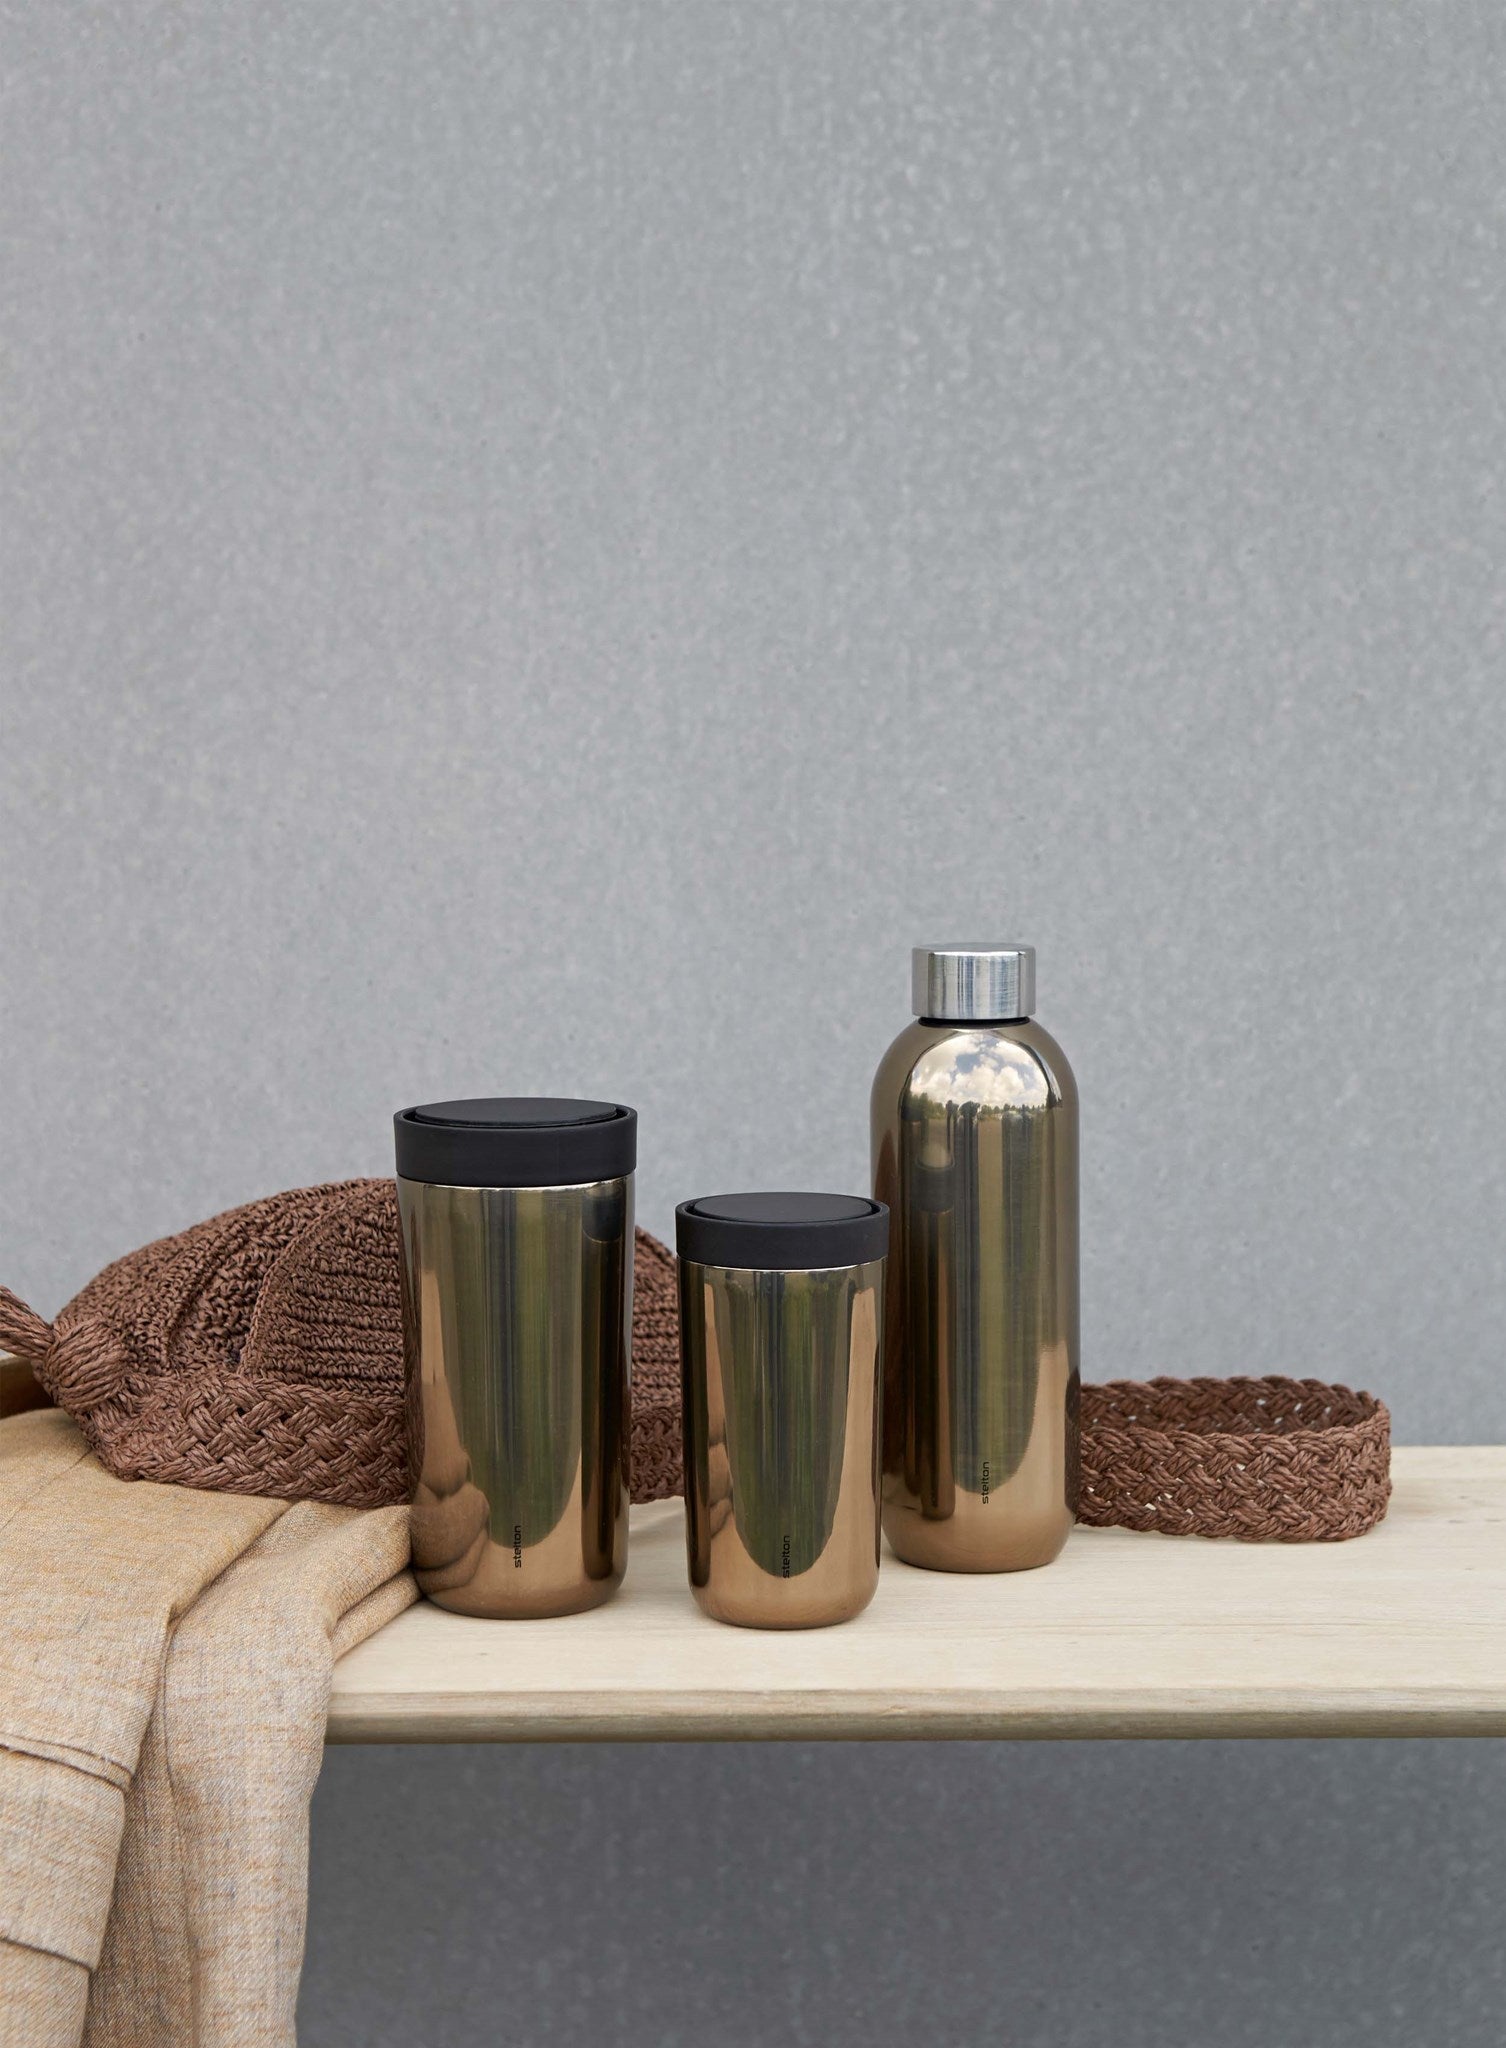 Stelton Keep Cool Thermos Bottle 0,6 L, oro oscuro